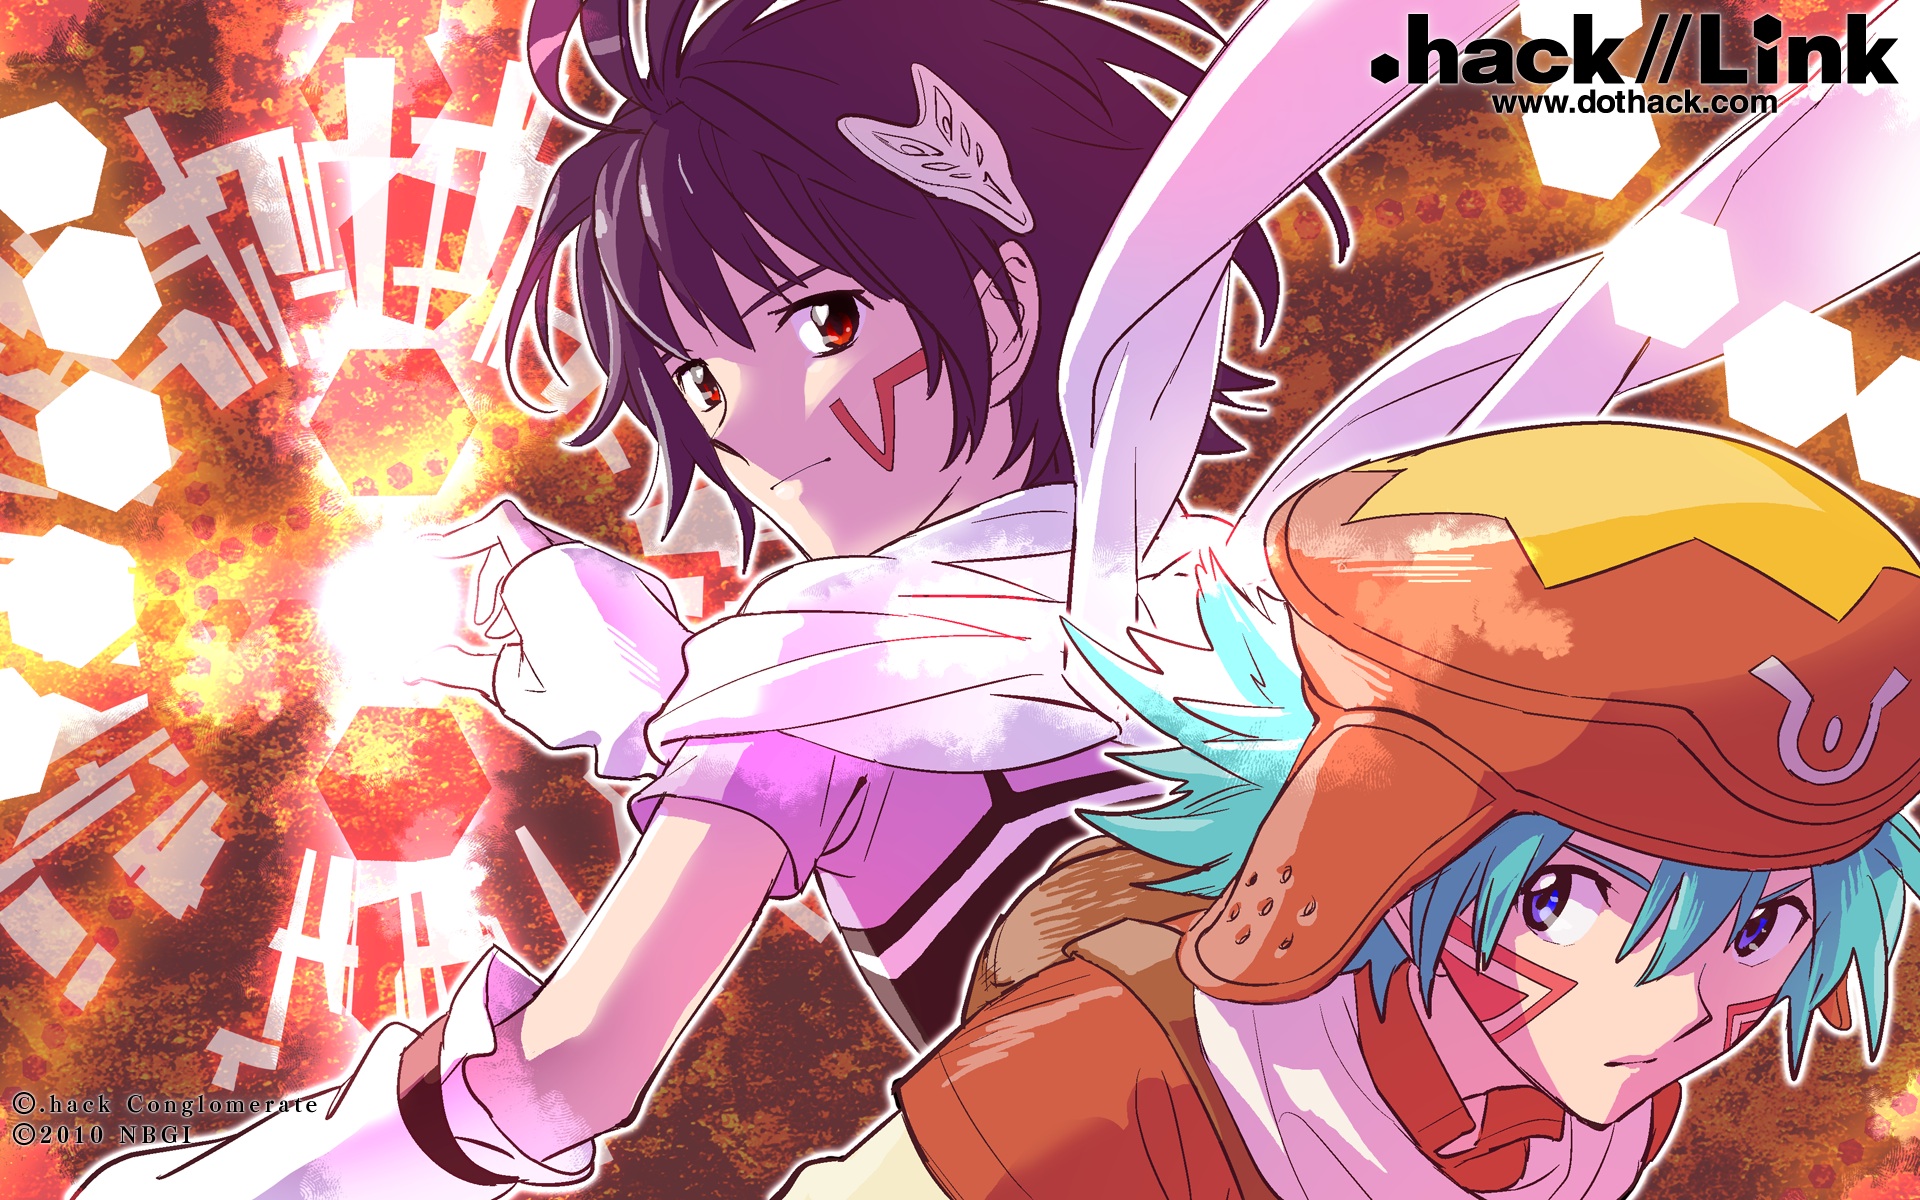 Anime characters Kite and Elk from .hack//link in a captivating desktop wallpaper.